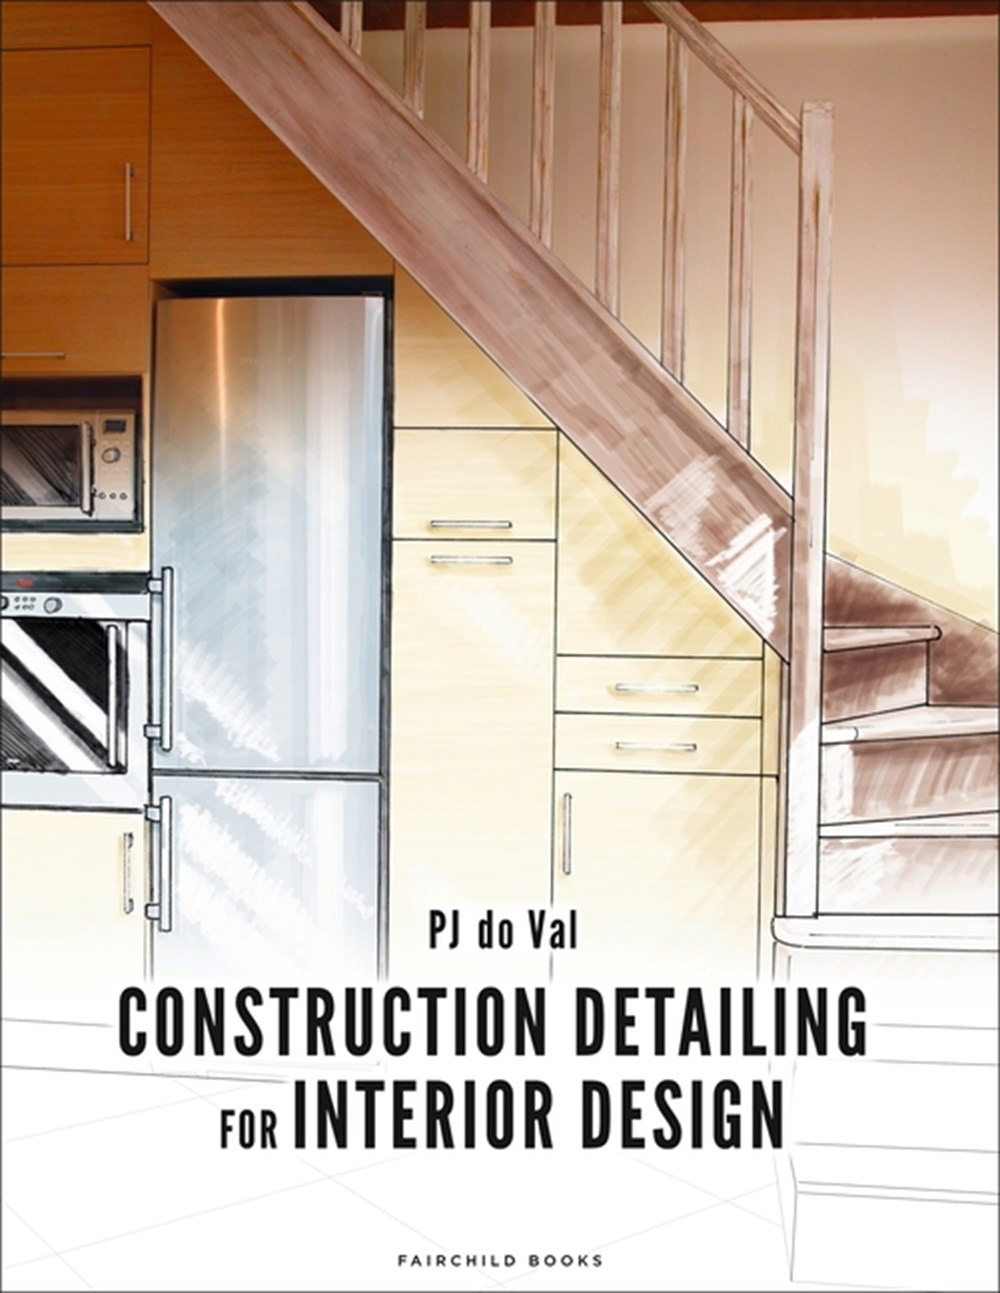 Construction Detailing for Interior Design: Bundle Book + Studio Access Card [With Access Code]